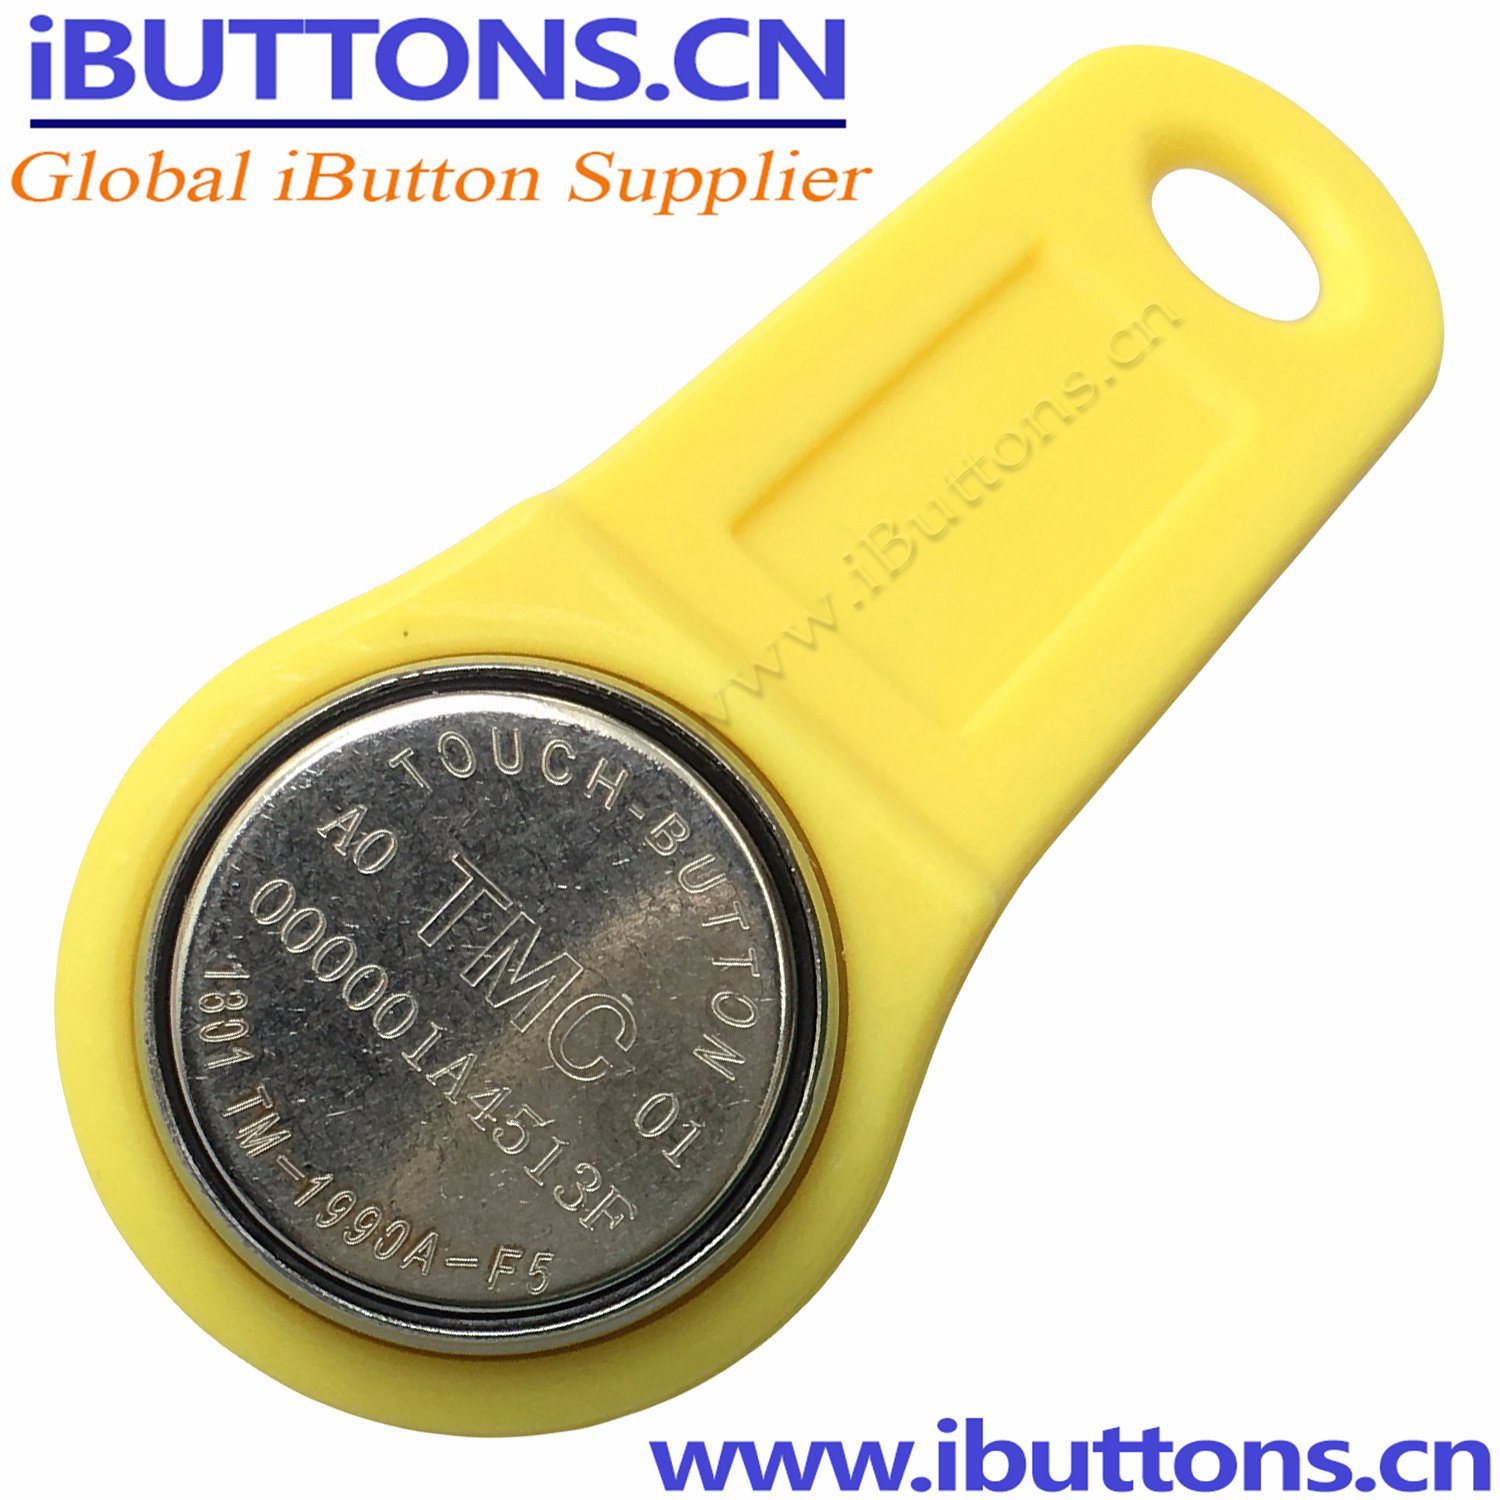 Waterproof TM1990A-F5 I Button for Cabinet Lock and Sauna Locker Room